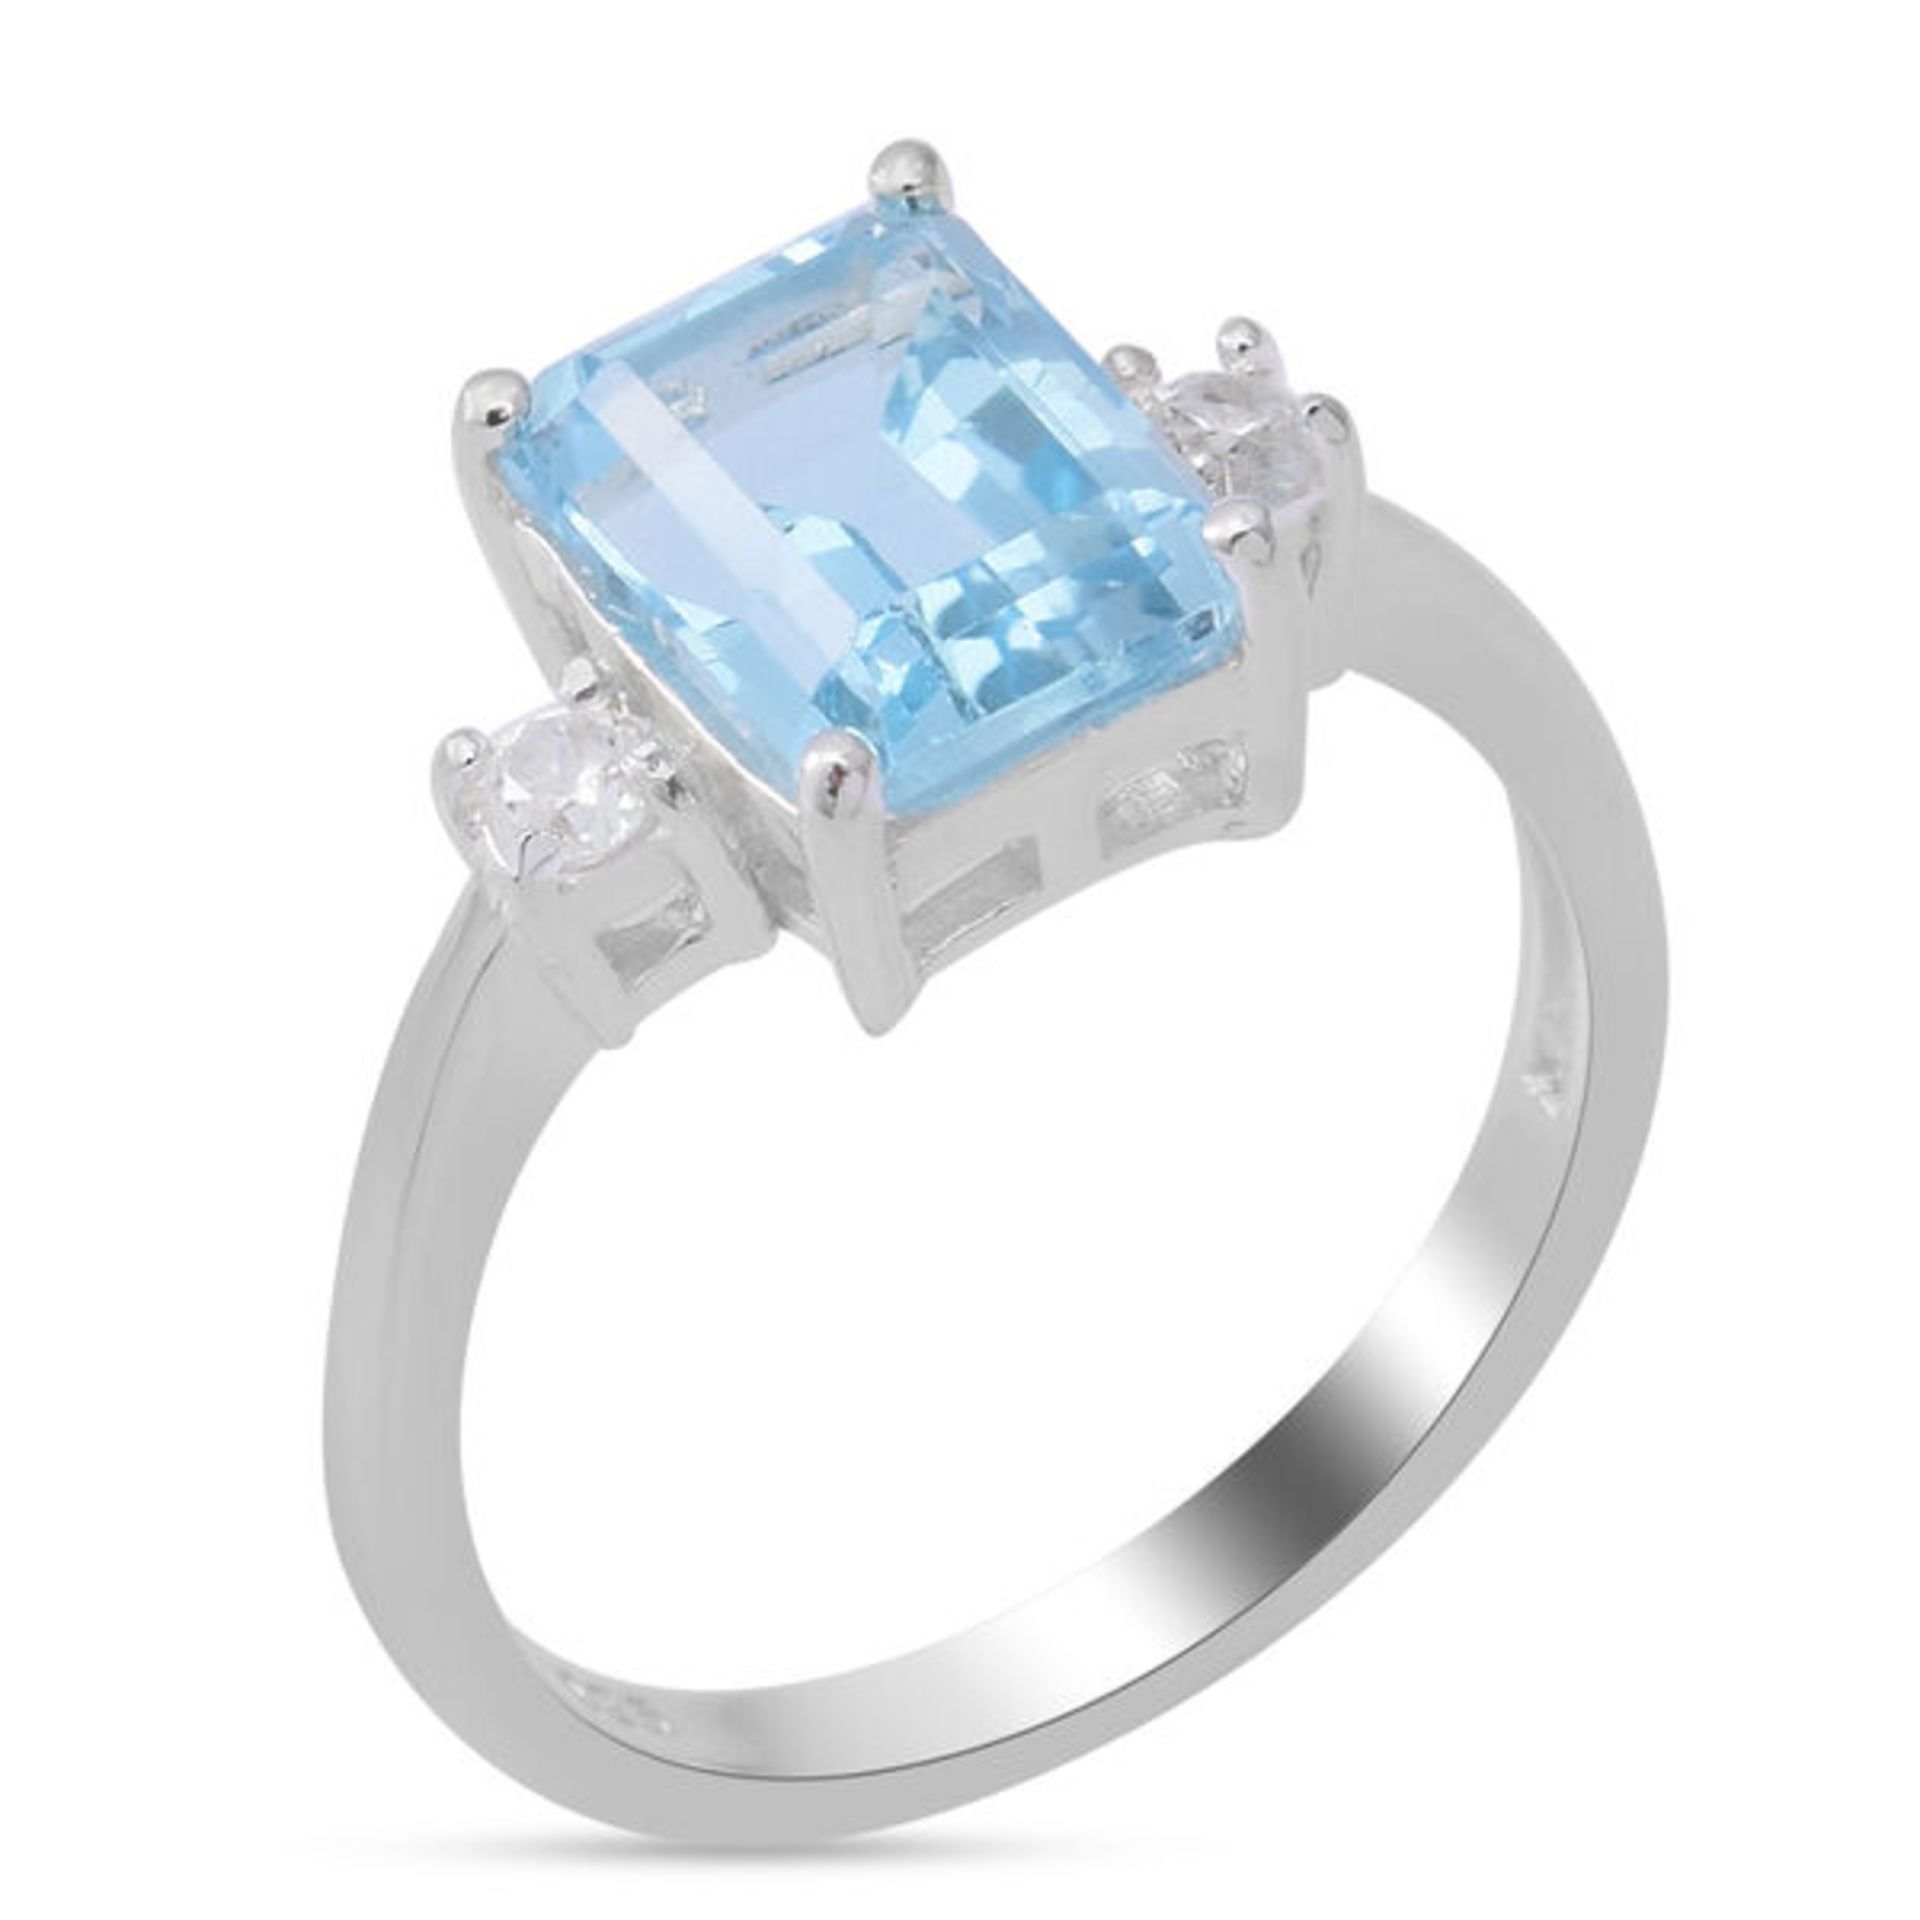 NEW!! Sterling Silver Sky Blue Topaz and Natural Cambodian Zircon Ring - Image 2 of 3